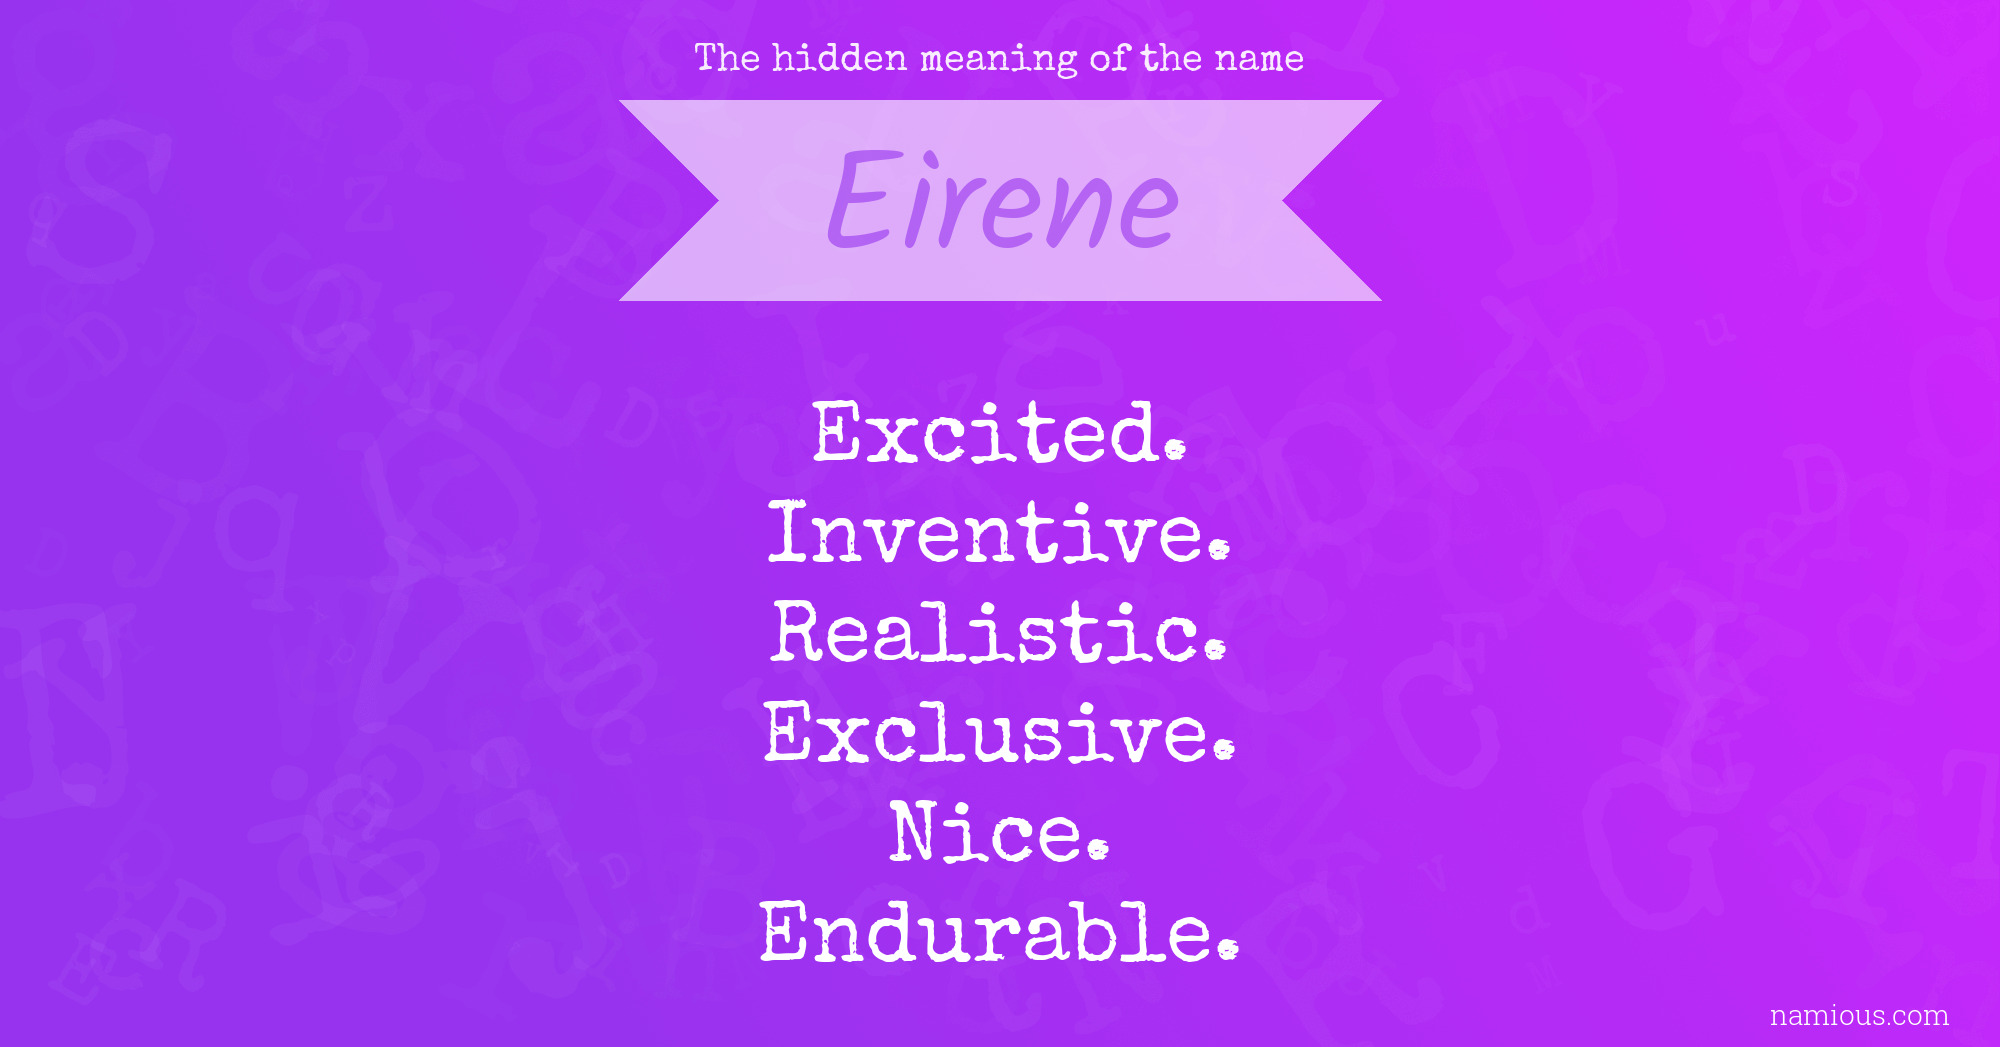 The hidden meaning of the name Eirene | Namious